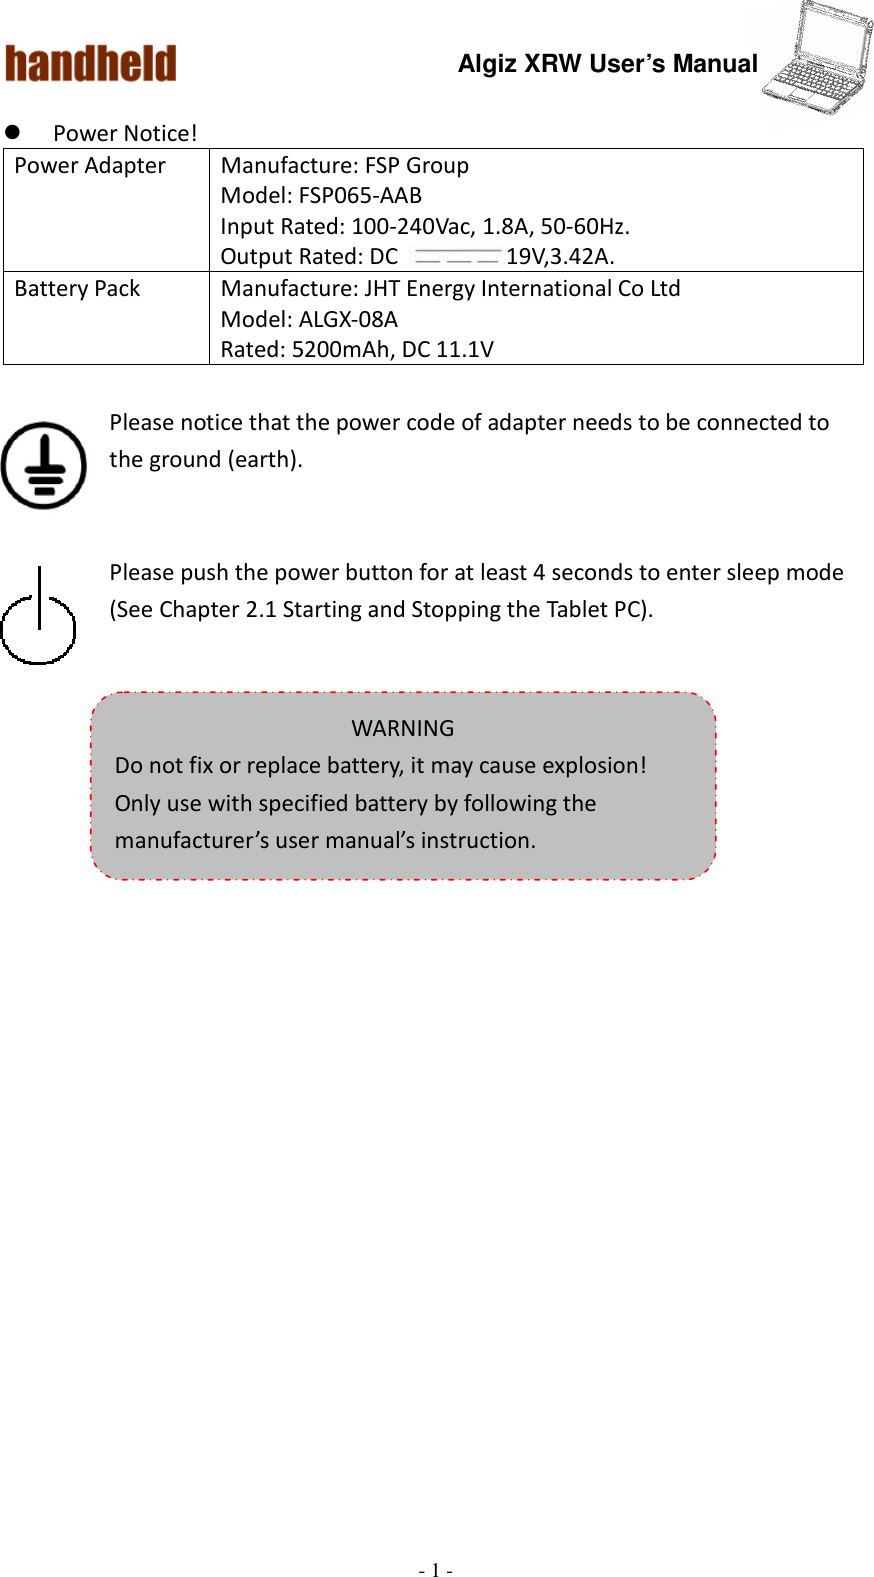 Algiz XRW User’s Manual  - 1 -   Power Notice!    Please notice that the power code of adapter needs to be connected to the ground (earth).   Please push the power button for at least 4 seconds to enter sleep mode (See Chapter 2.1 Starting and Stopping the Tablet PC).     Power Adapter  Manufacture: FSP Group Model: FSP065-AAB Input Rated: 100-240Vac, 1.8A, 50-60Hz. Output Rated: DC  19V,3.42A. Battery Pack  Manufacture: JHT Energy International Co Ltd Model: ALGX-08A Rated: 5200mAh, DC 11.1V  WARNING Do not fix or replace battery, it may cause explosion! Only use with specified battery by following the manufacturer’s user manual’s instruction. 